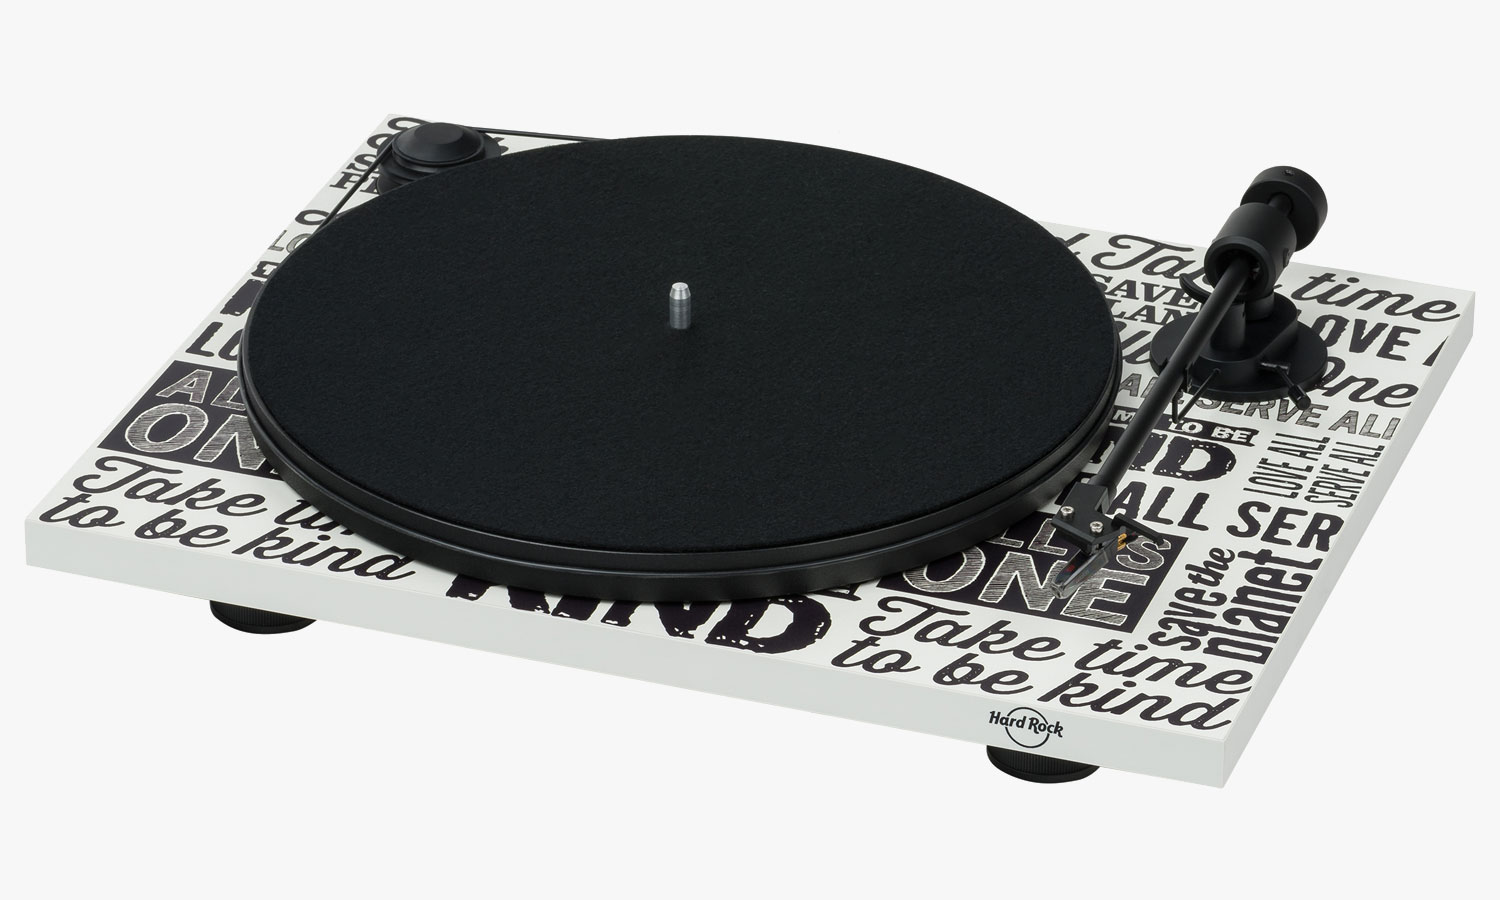 Pro-ject Artist Collection Turntables